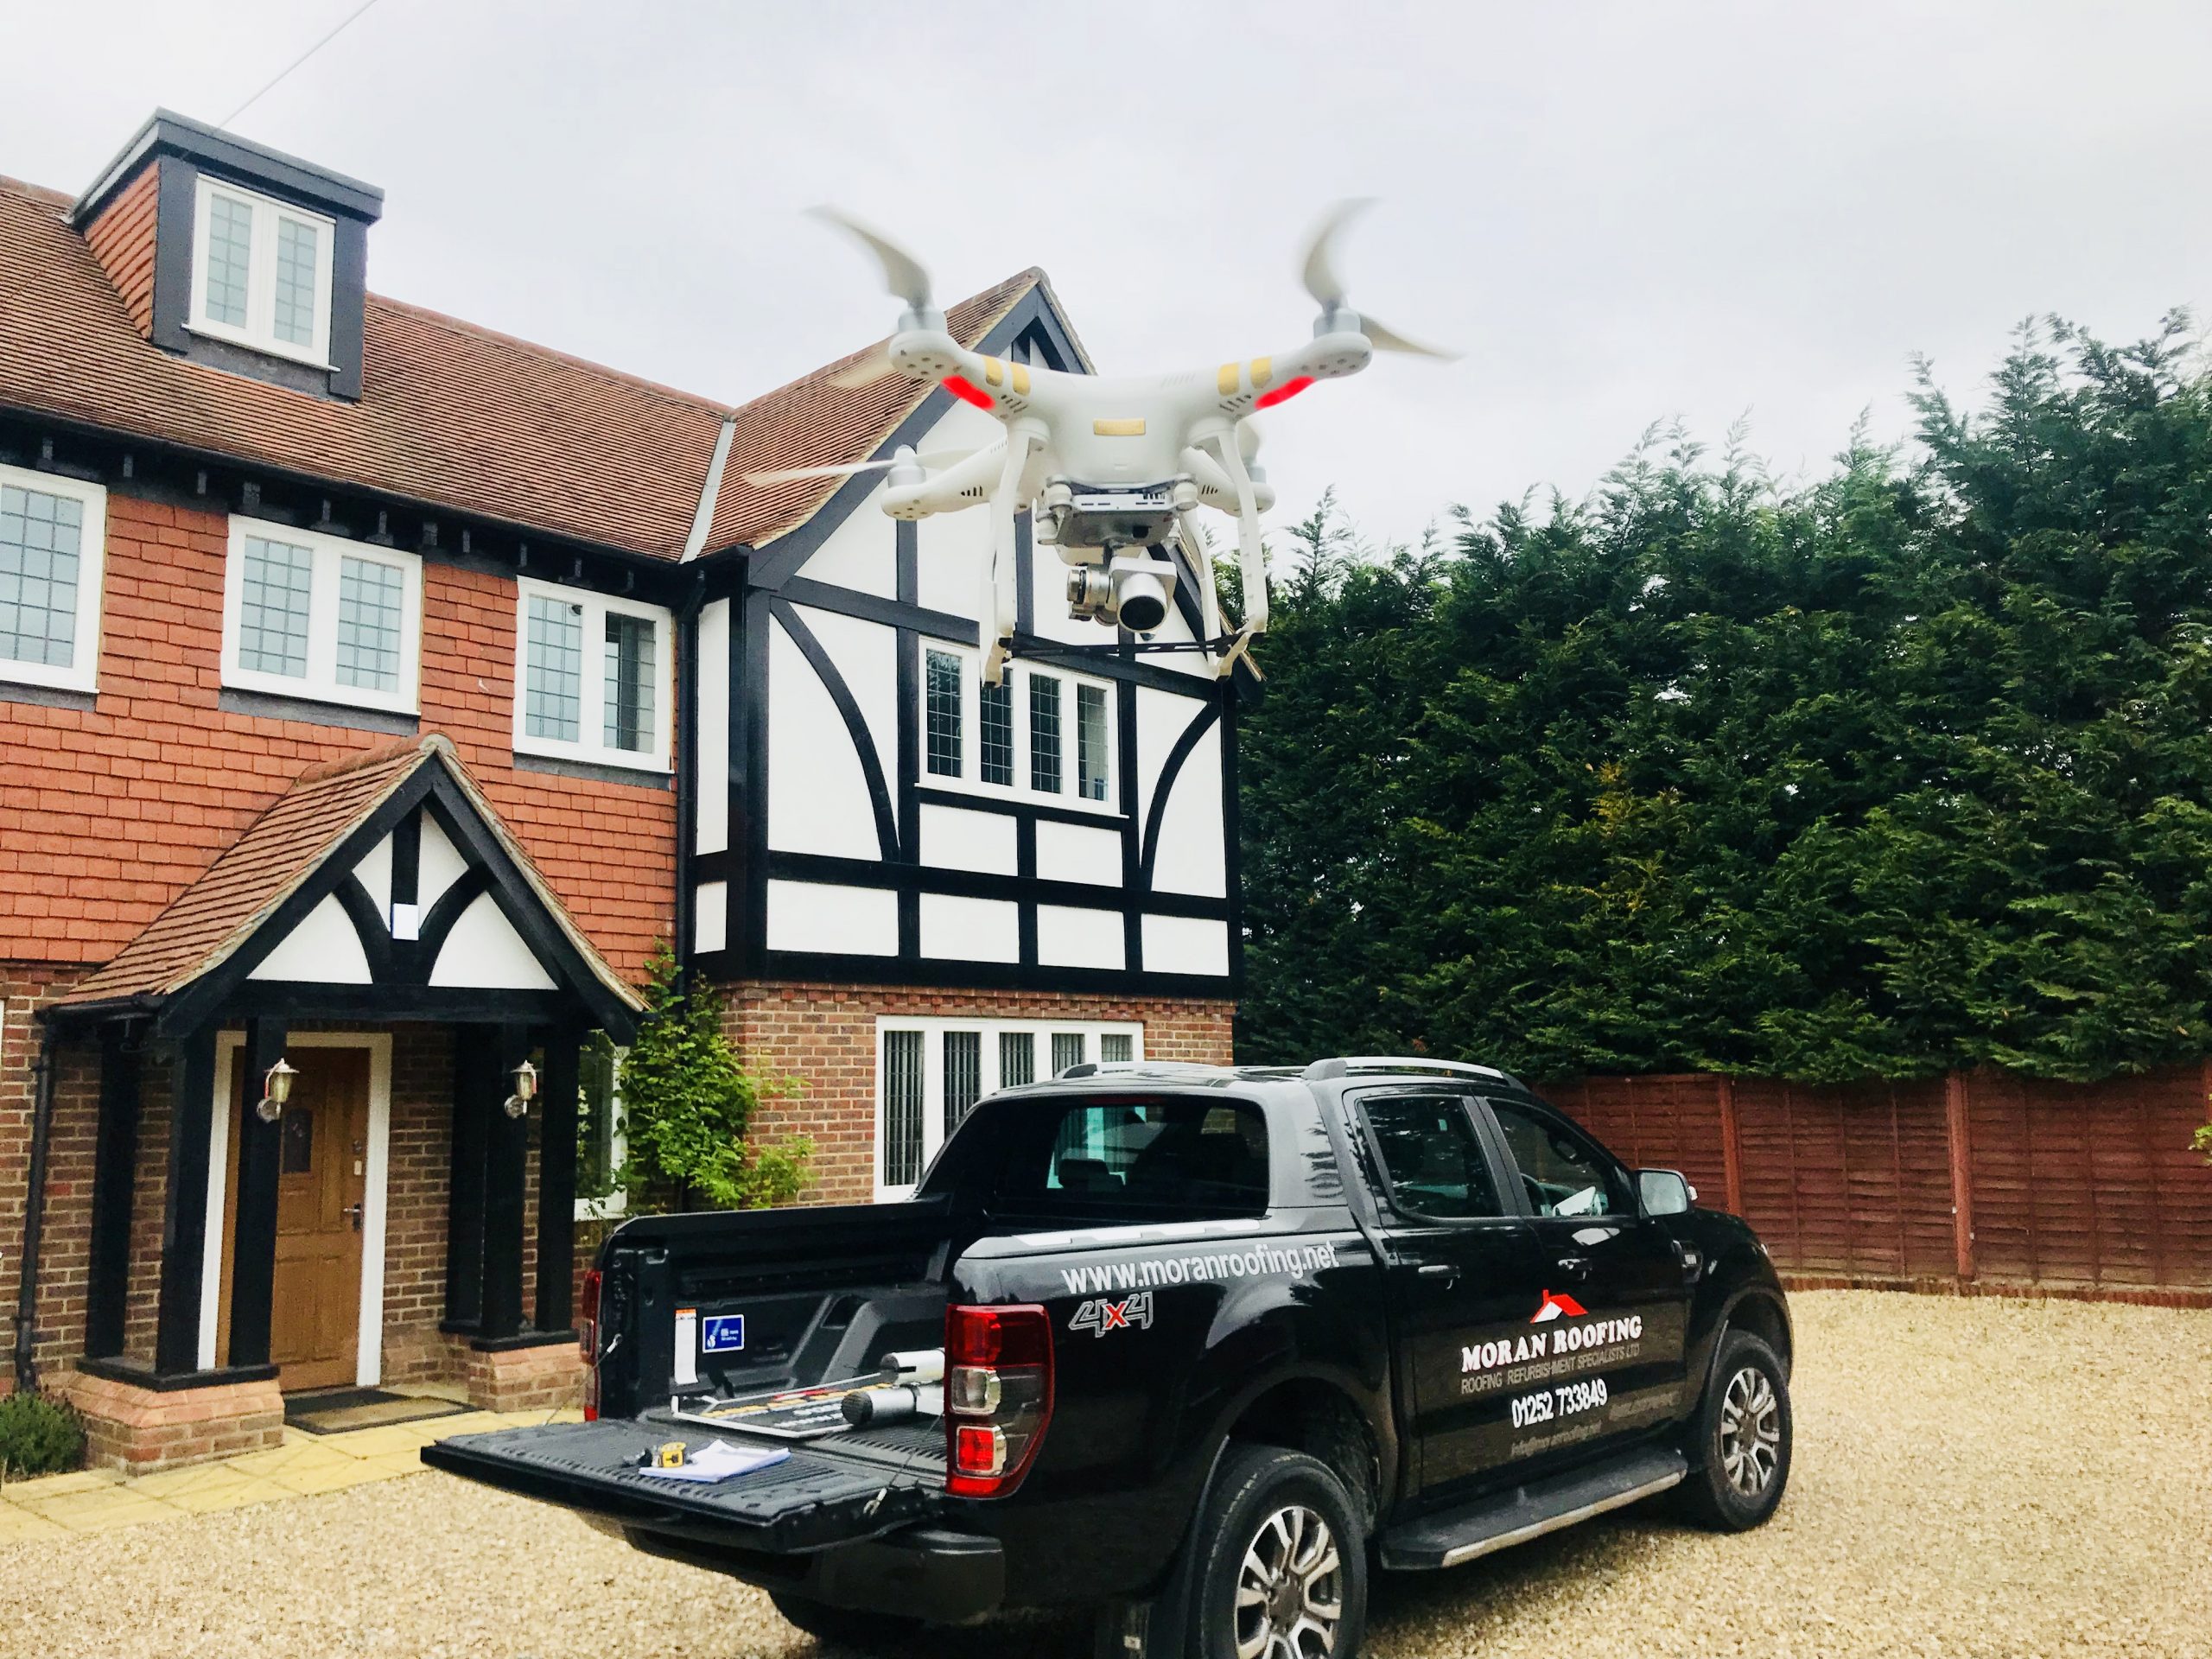 Drone and Moran Roofing truck, used for roof surveys